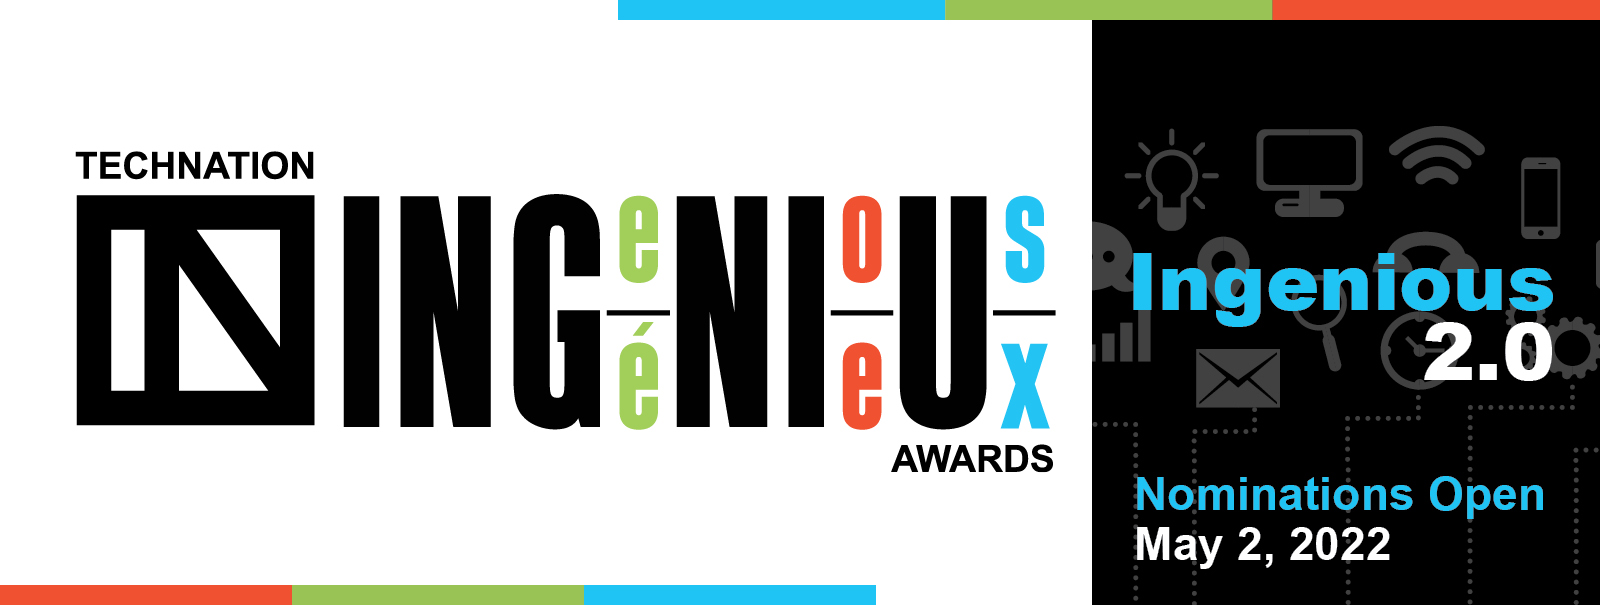 TECHNATION Ingenious Awards 2.0 - Nominations open May 2